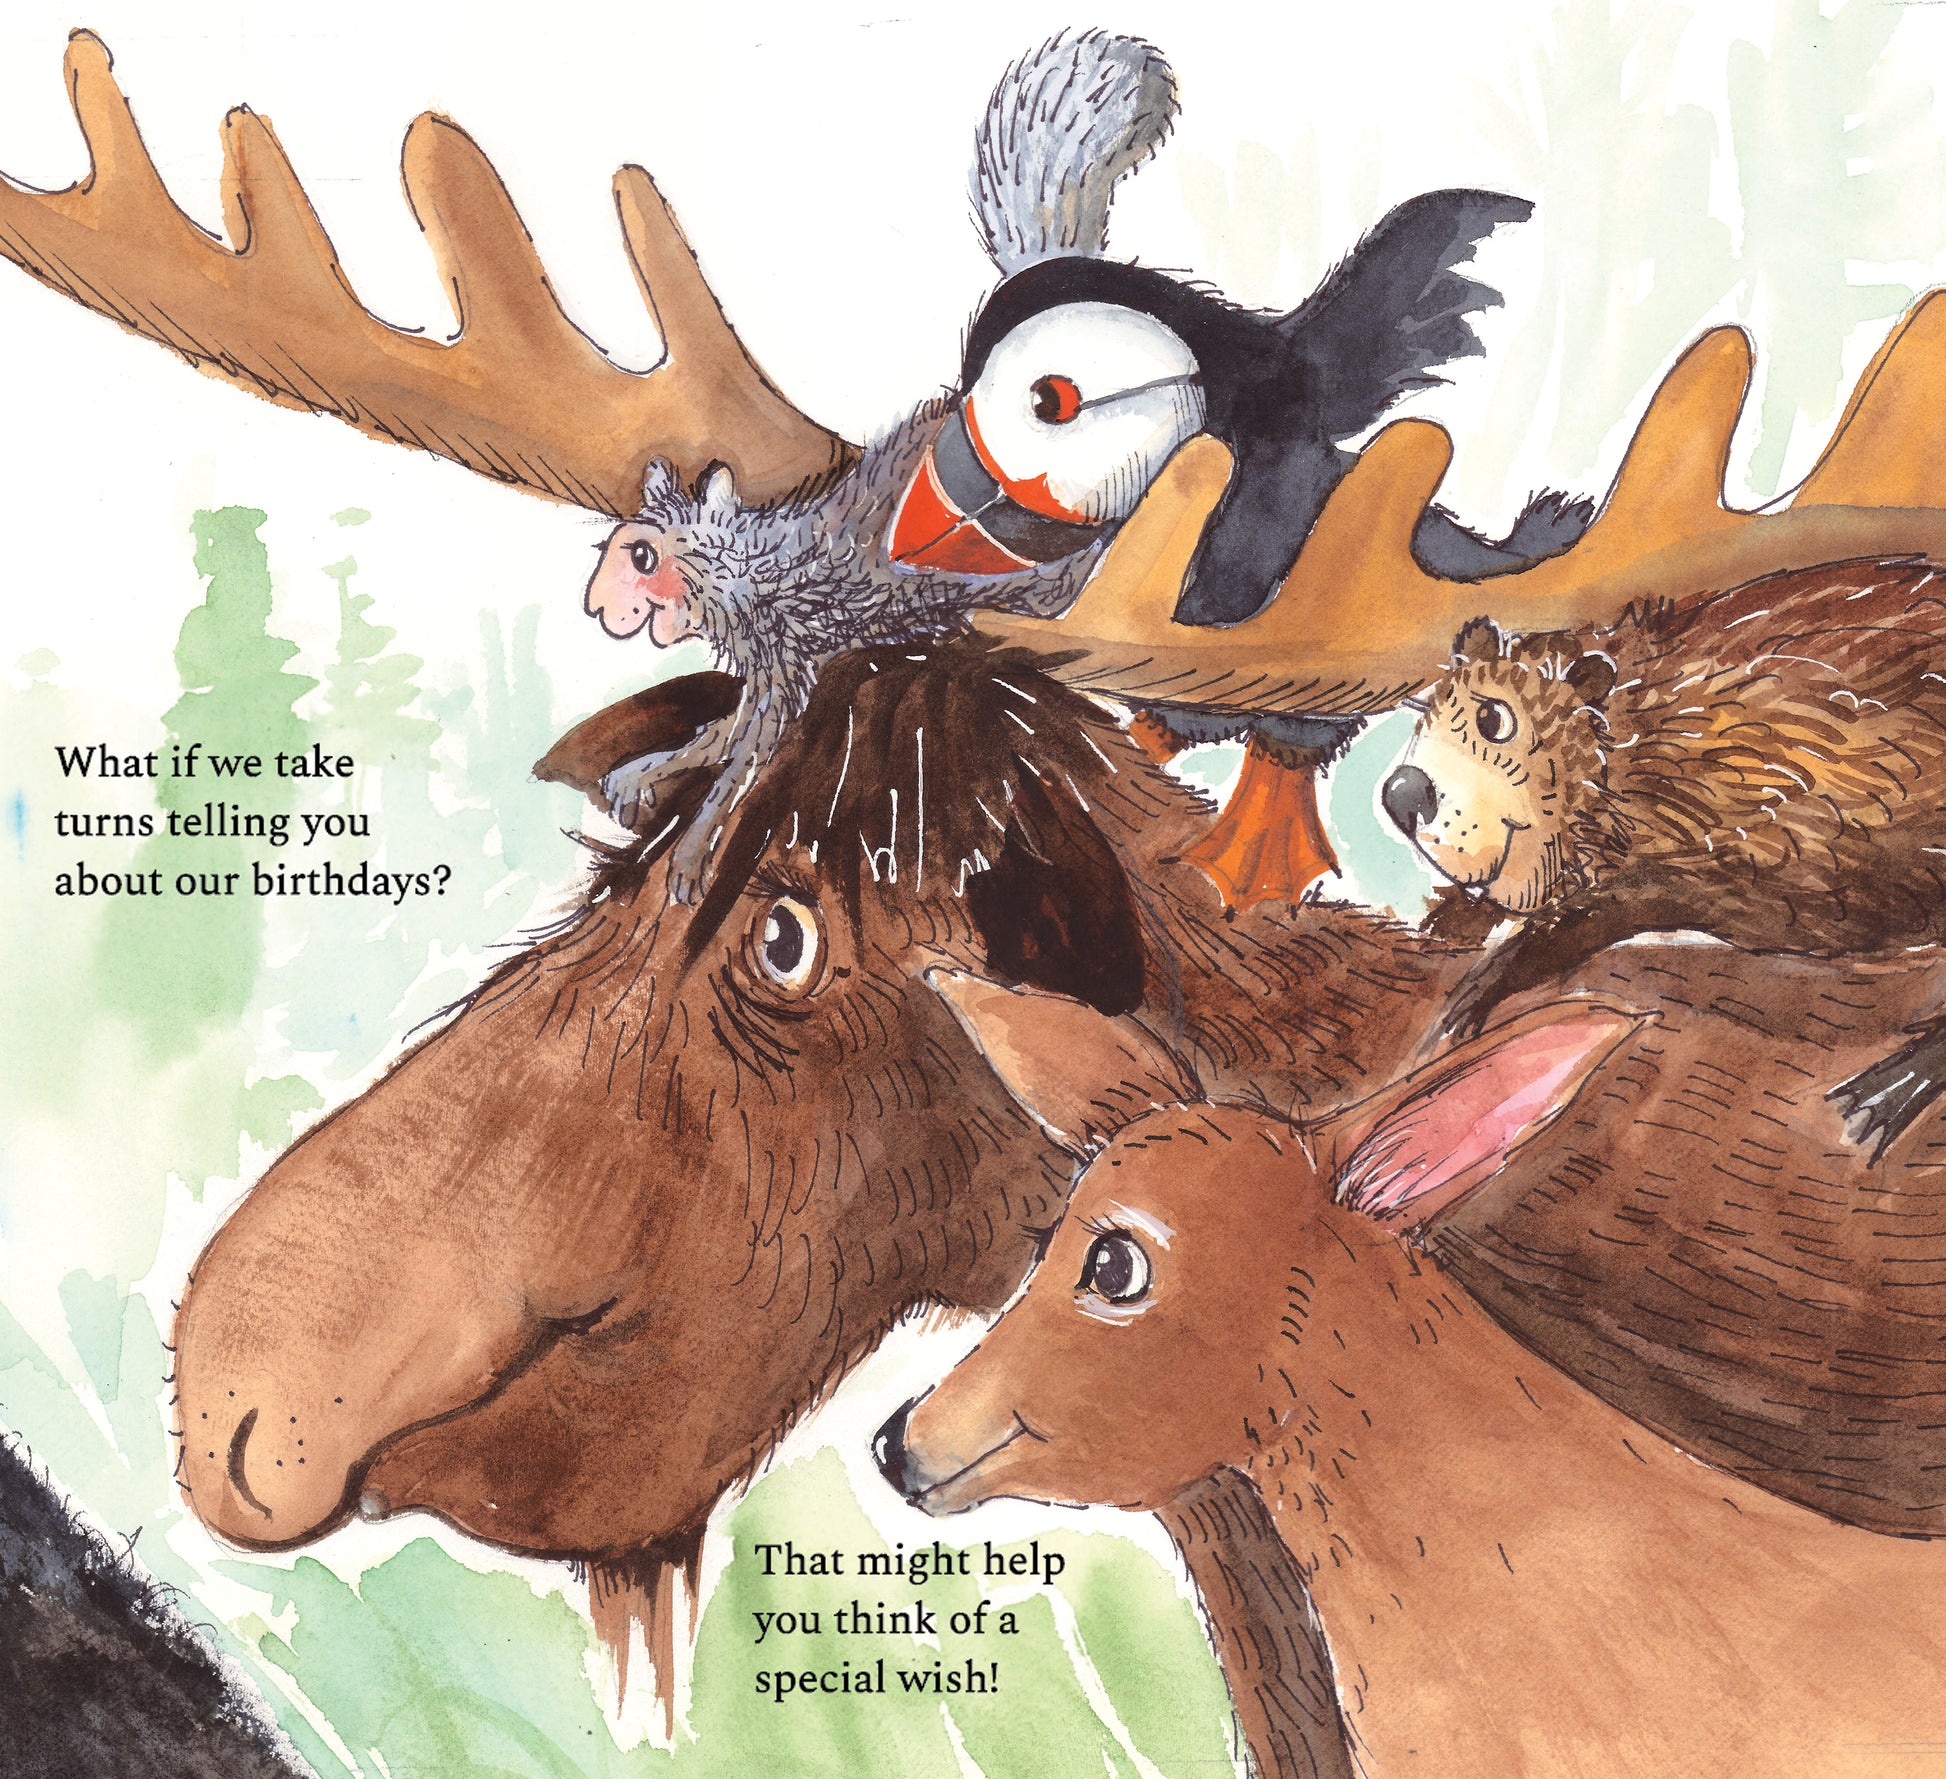 Page from inside The Maine Birthday Book with moose deer puffin beaver squirrel